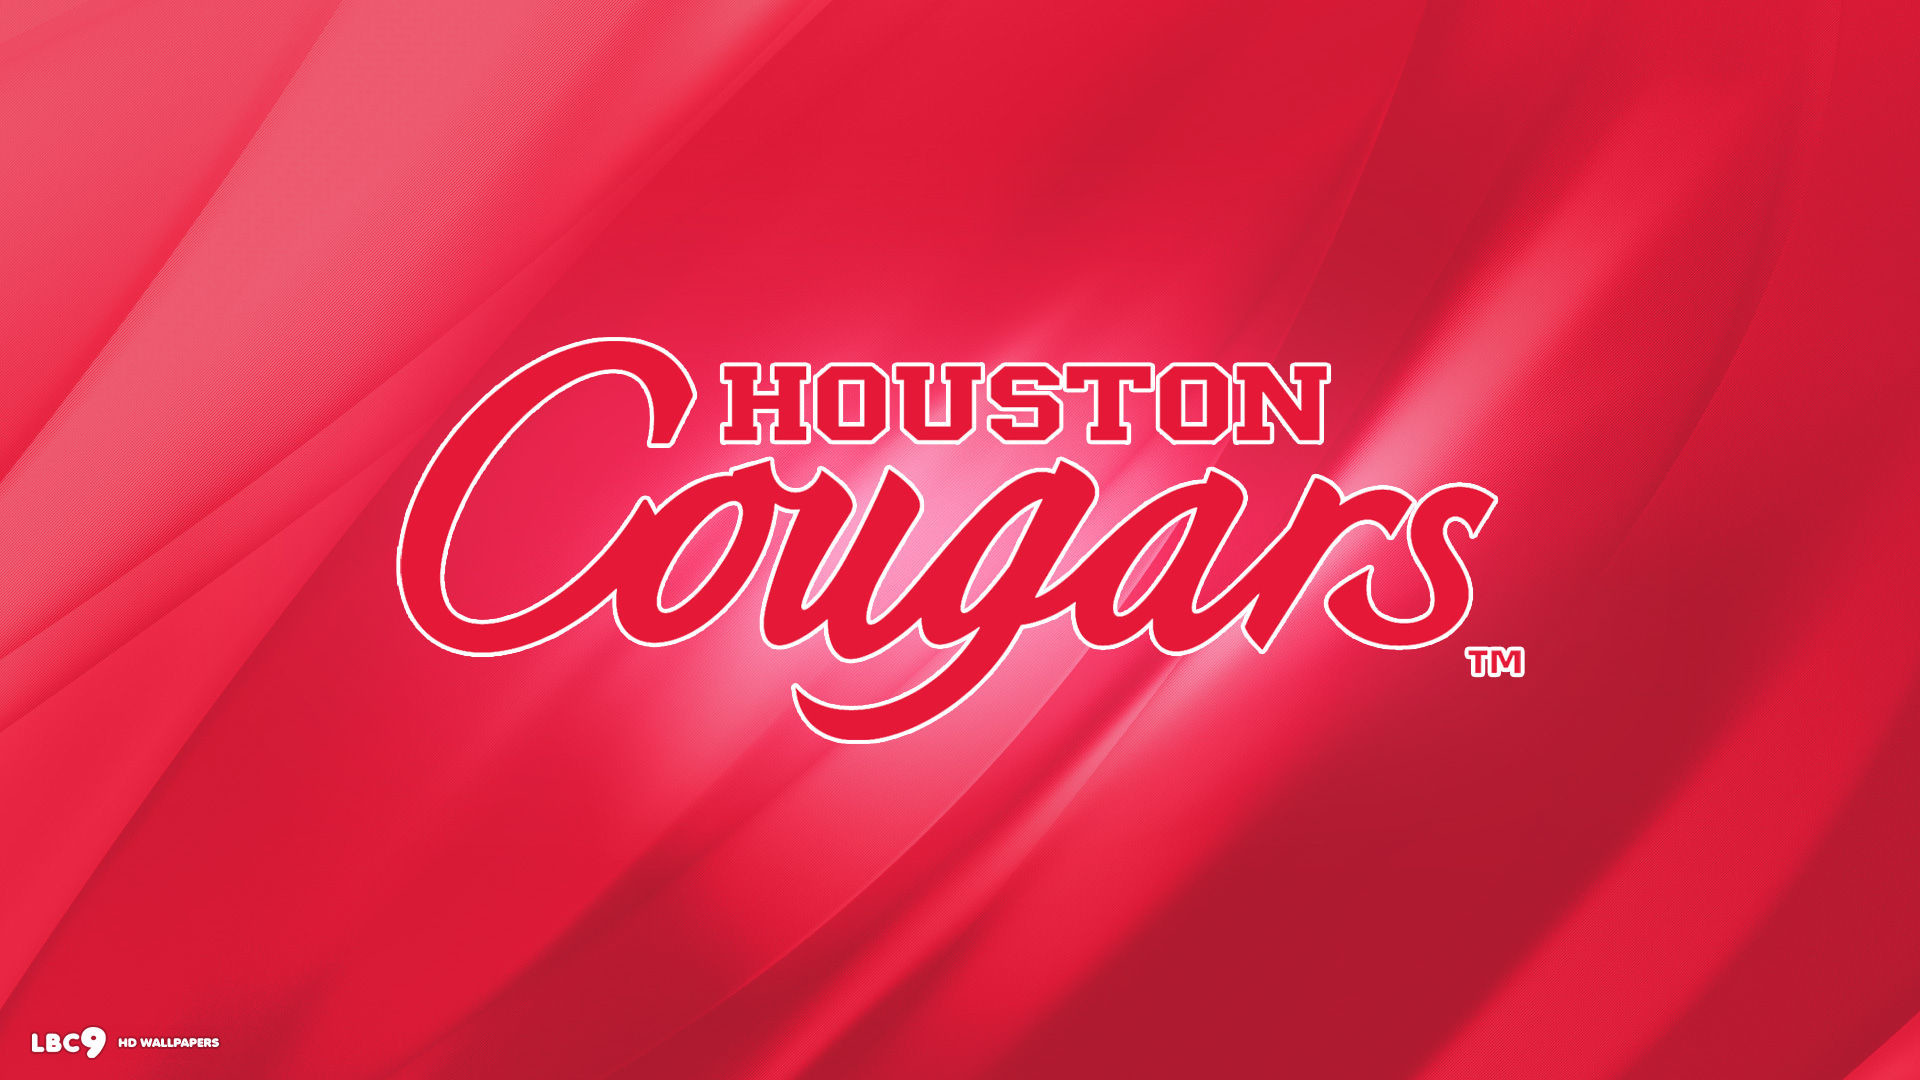 1920x1080 Houston Cougars Wallpaper Related Keywords & Suggestions .